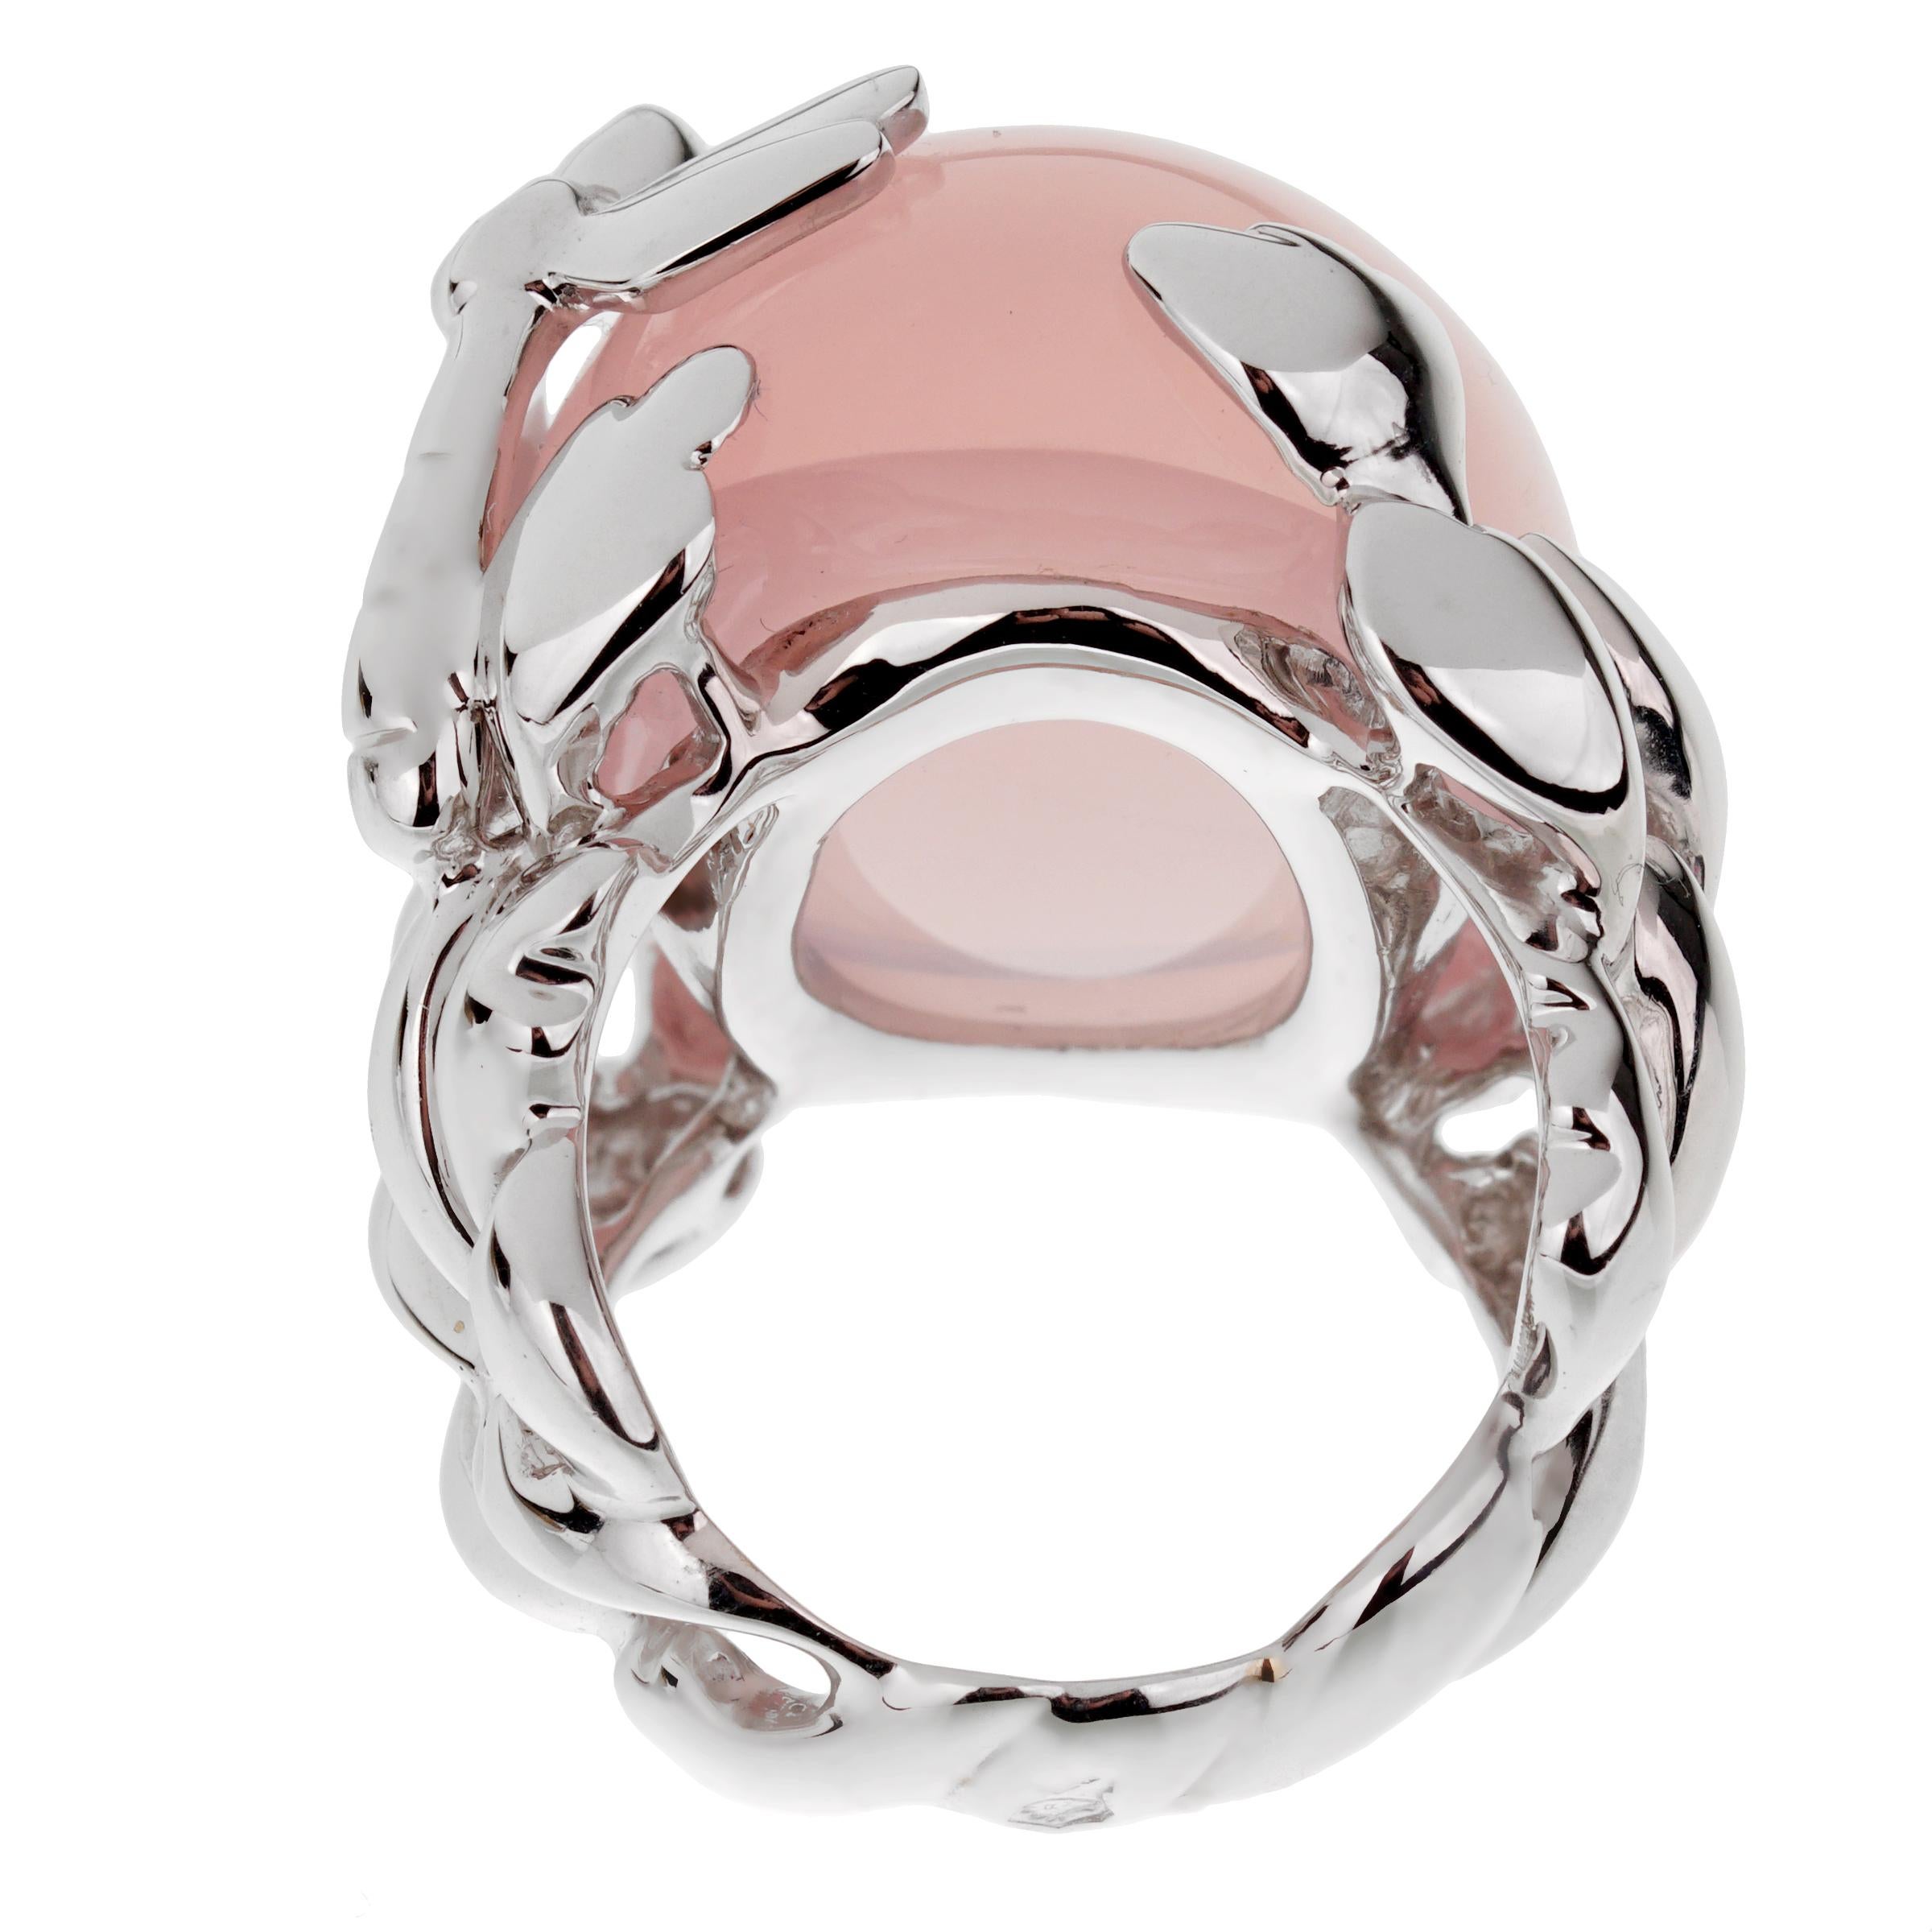 Christian Dior 50 Carat Pink Quartz Diamond White Gold Cocktail Ring In New Condition For Sale In Feasterville, PA